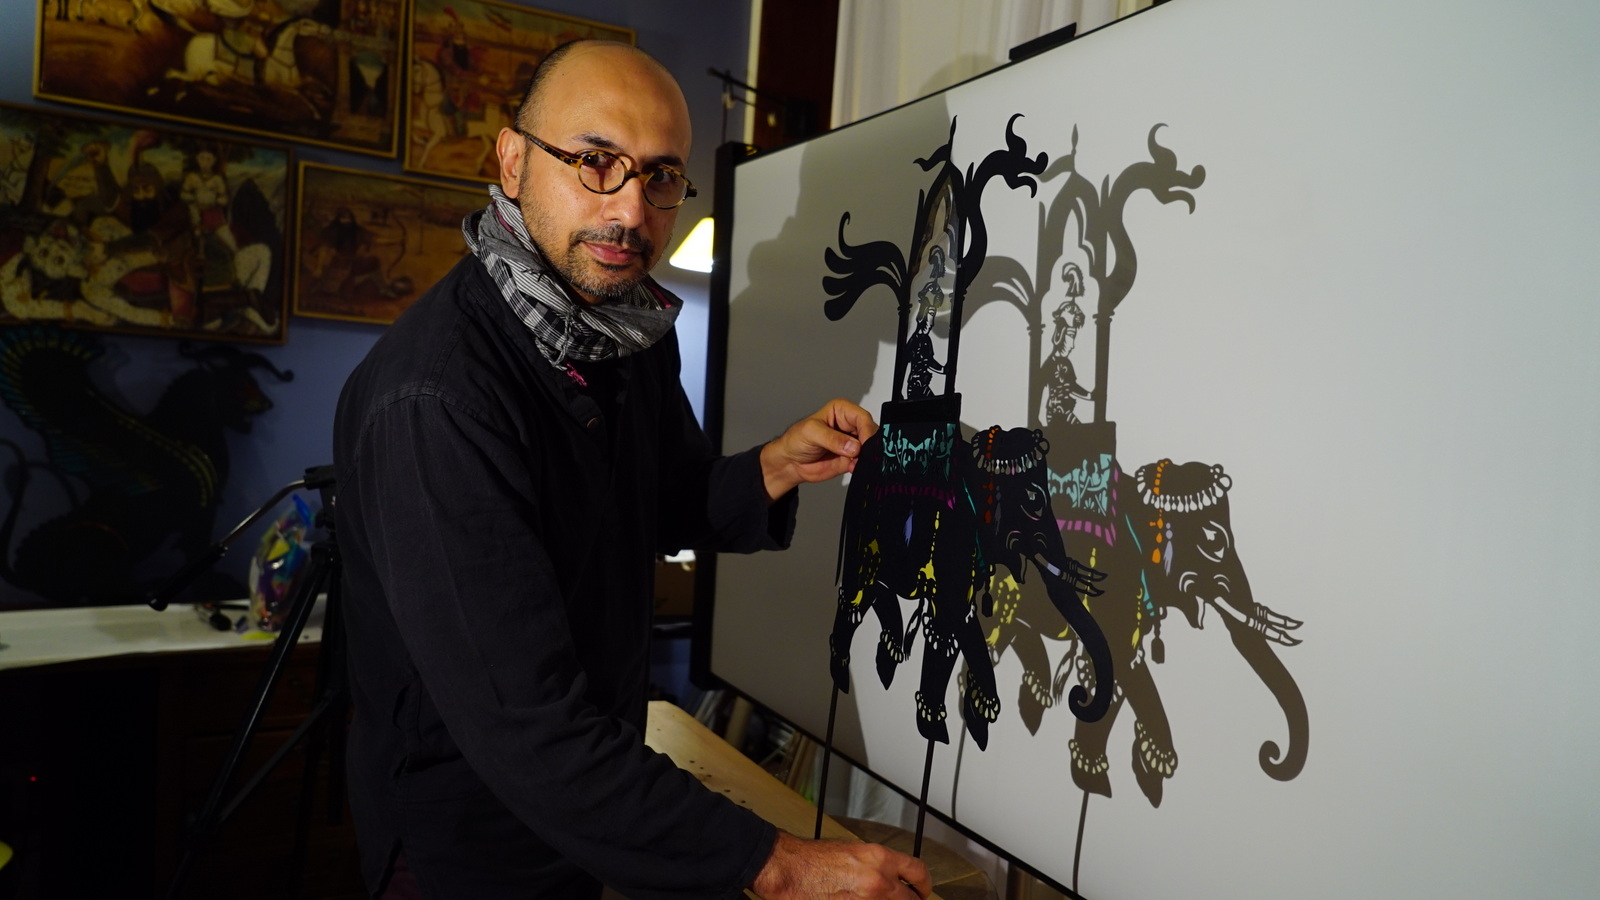 Feathers of Fire. Pictured: Hamid Rahmanian with Puppet.